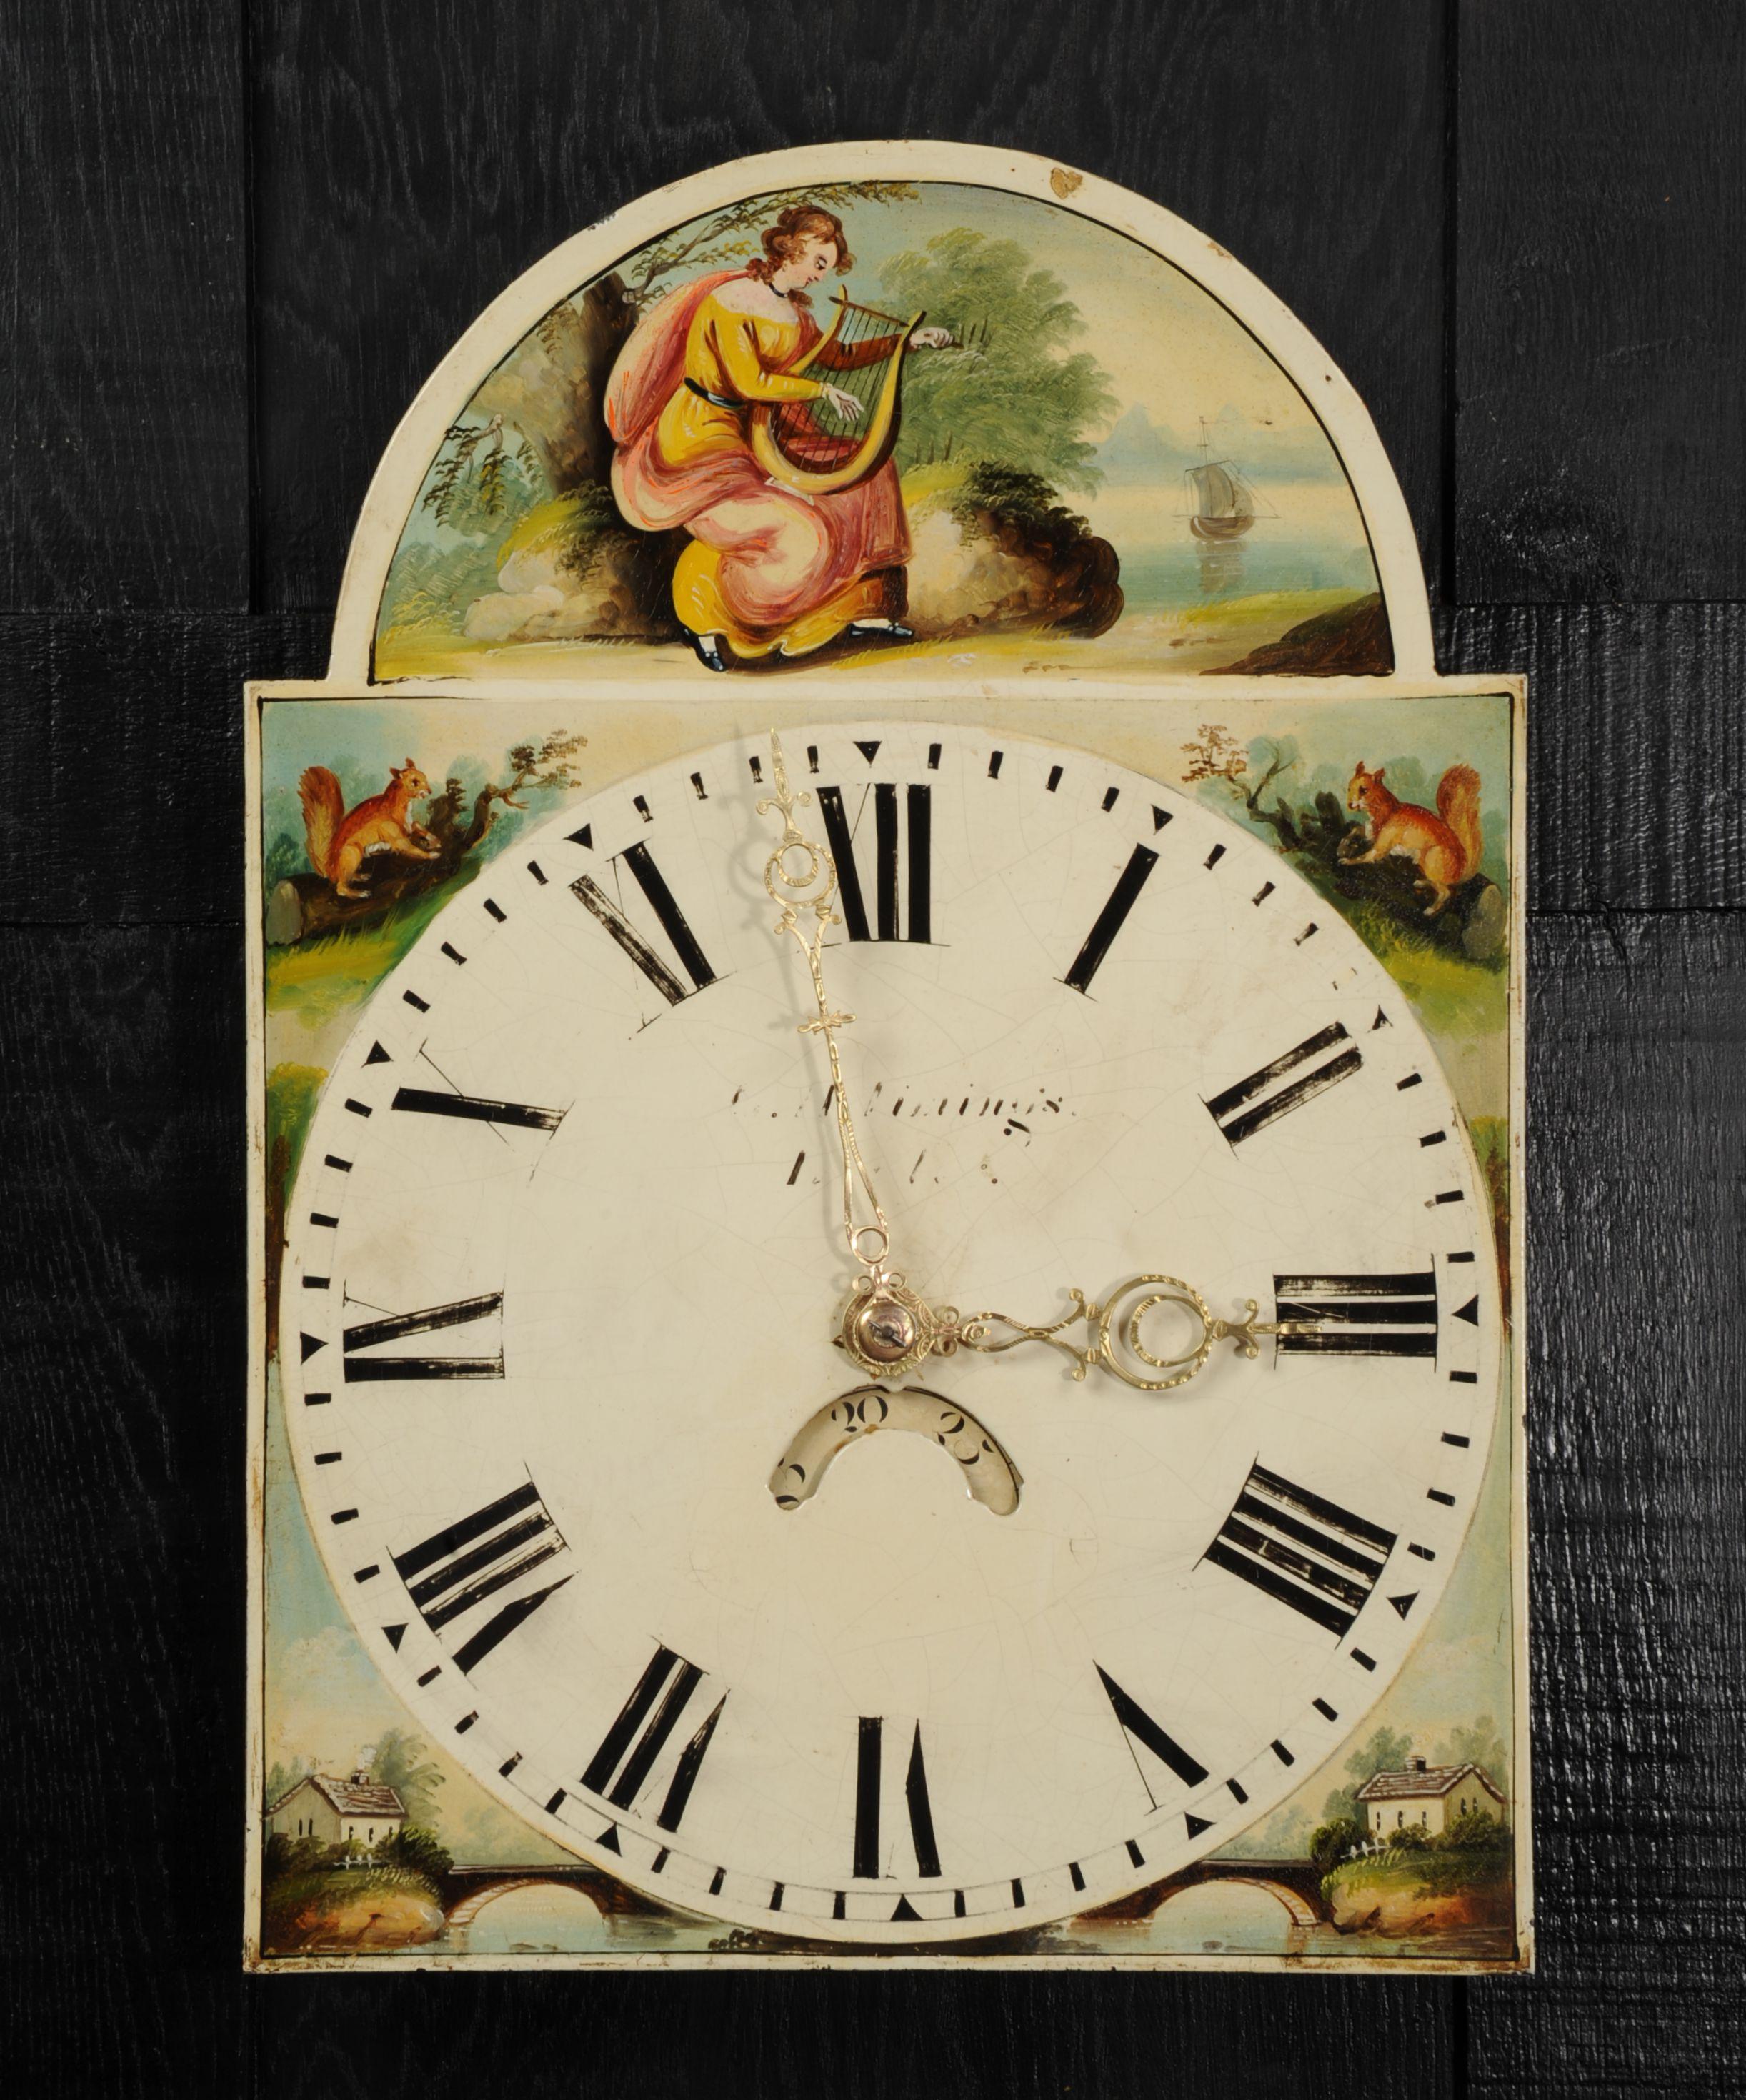 A lovely antique iron clock dial dating from 1840 featuring the beautiful folk tale of a woman singing and playing a lyre for her lovers safe return from sea. Charming squirrels and country scenes decorate the corners. The painting is original with